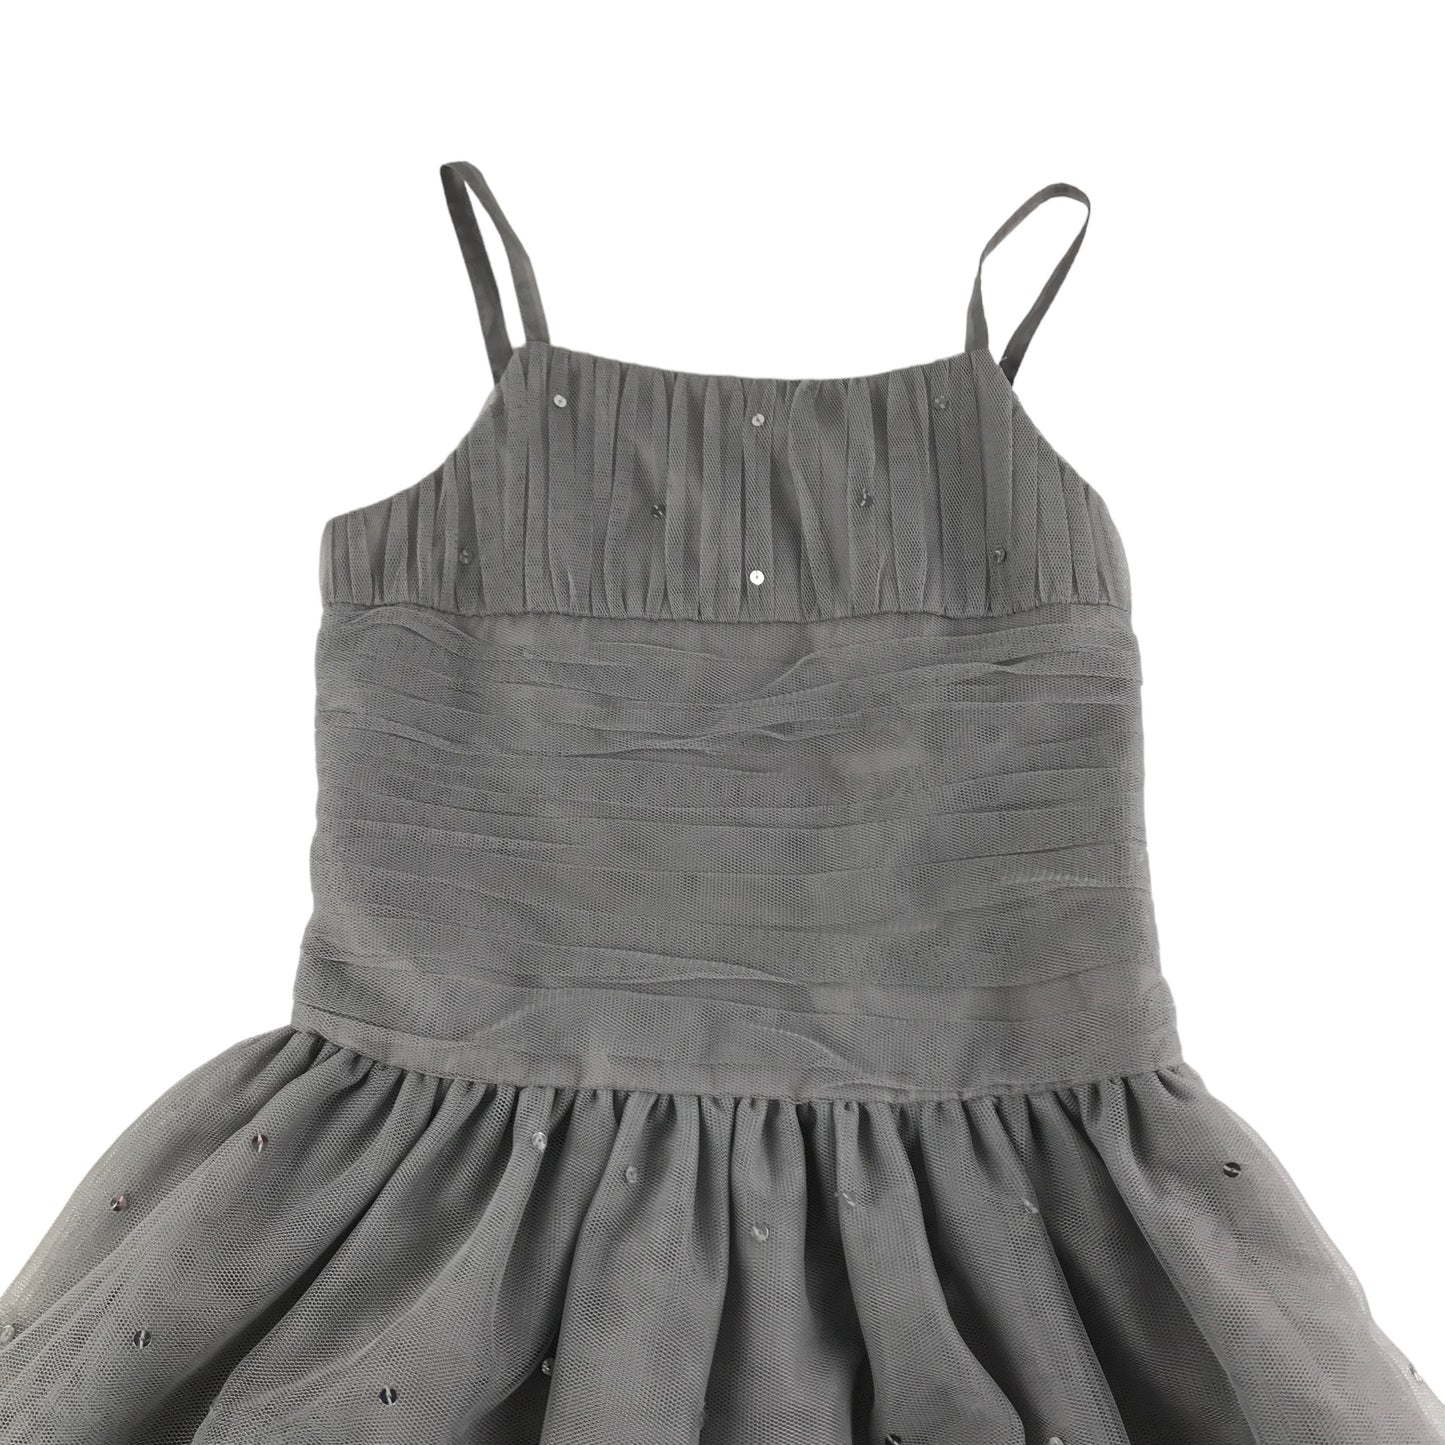 M&S Dress Age 9 Grey Mesh Layered Strap Shoulders Sequins